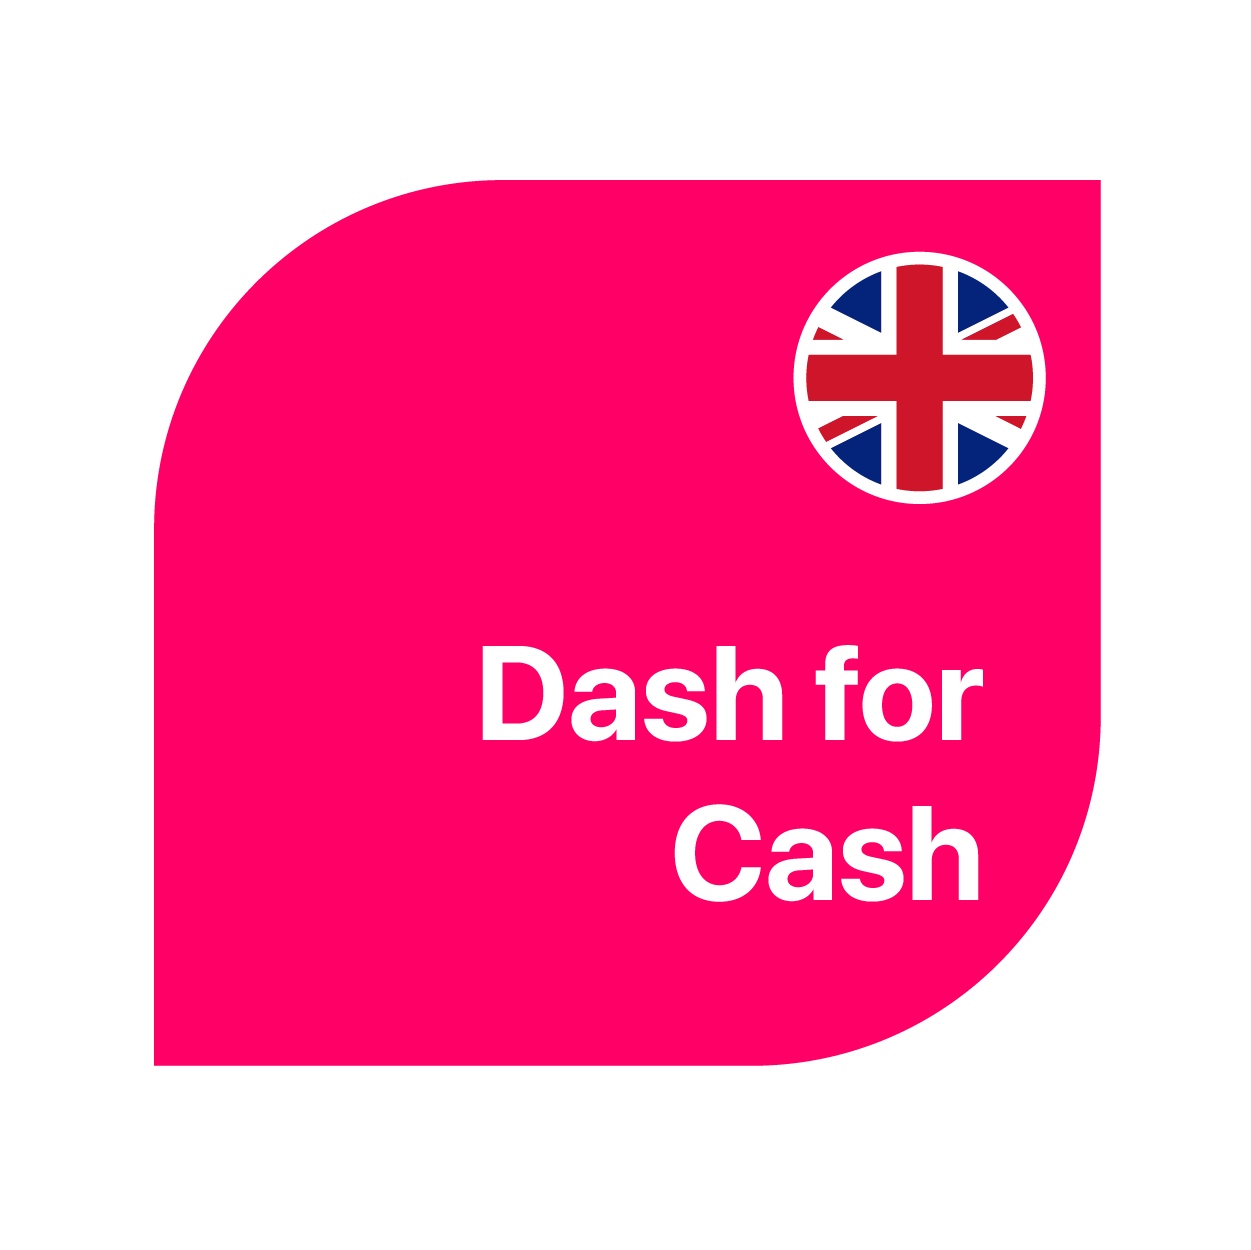 Cash_for_Dash_eng-02.png